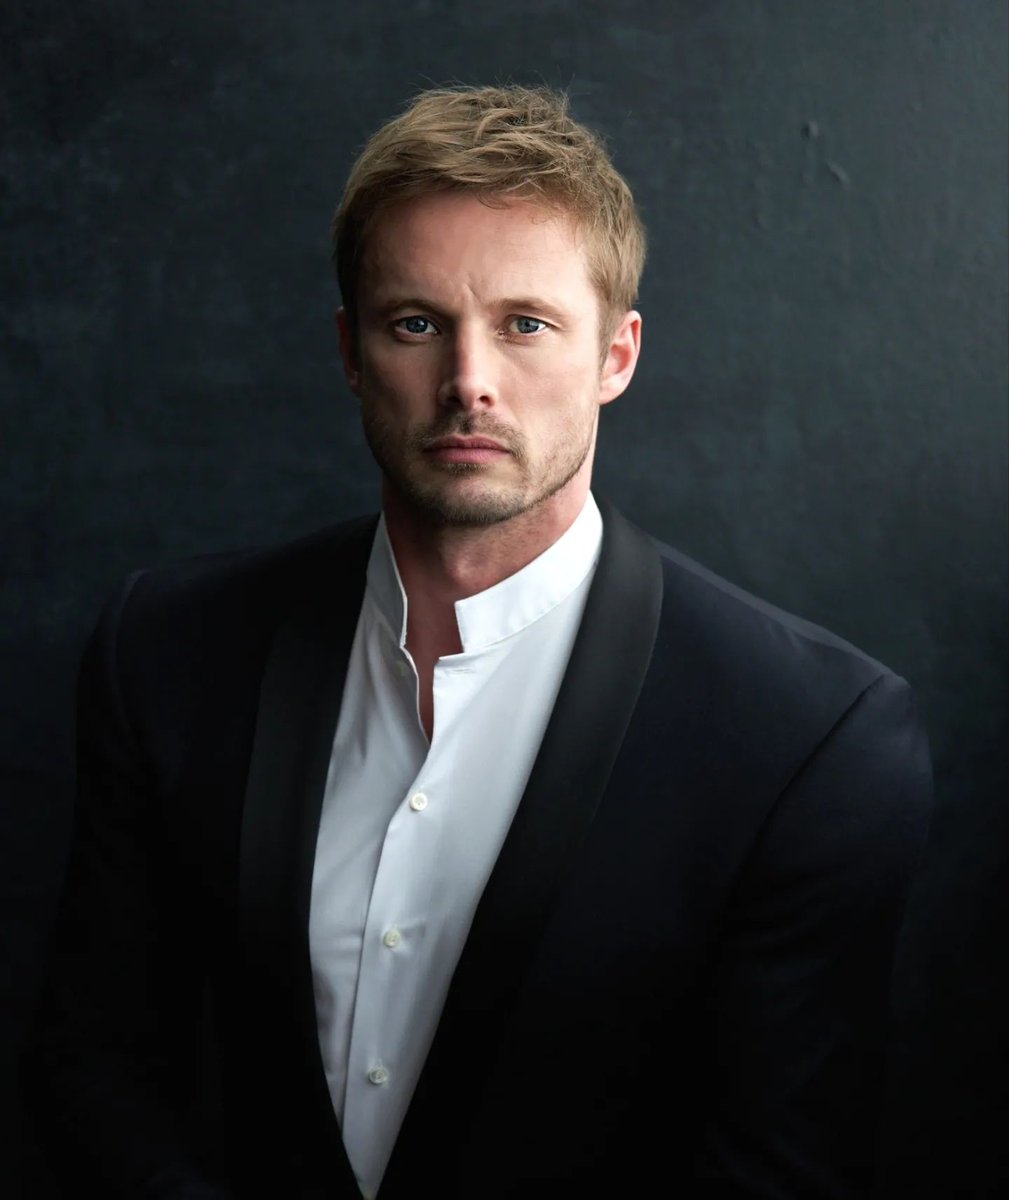 Iona Maclean on Instagram: 'Excited to be representing this phenomenal actor @bradleyjames at Zero Gravity Management. Incredible body of work and truly inspired by this brilliant artist'.

Photo by Joshua Shelton

#BradleyJames #photography